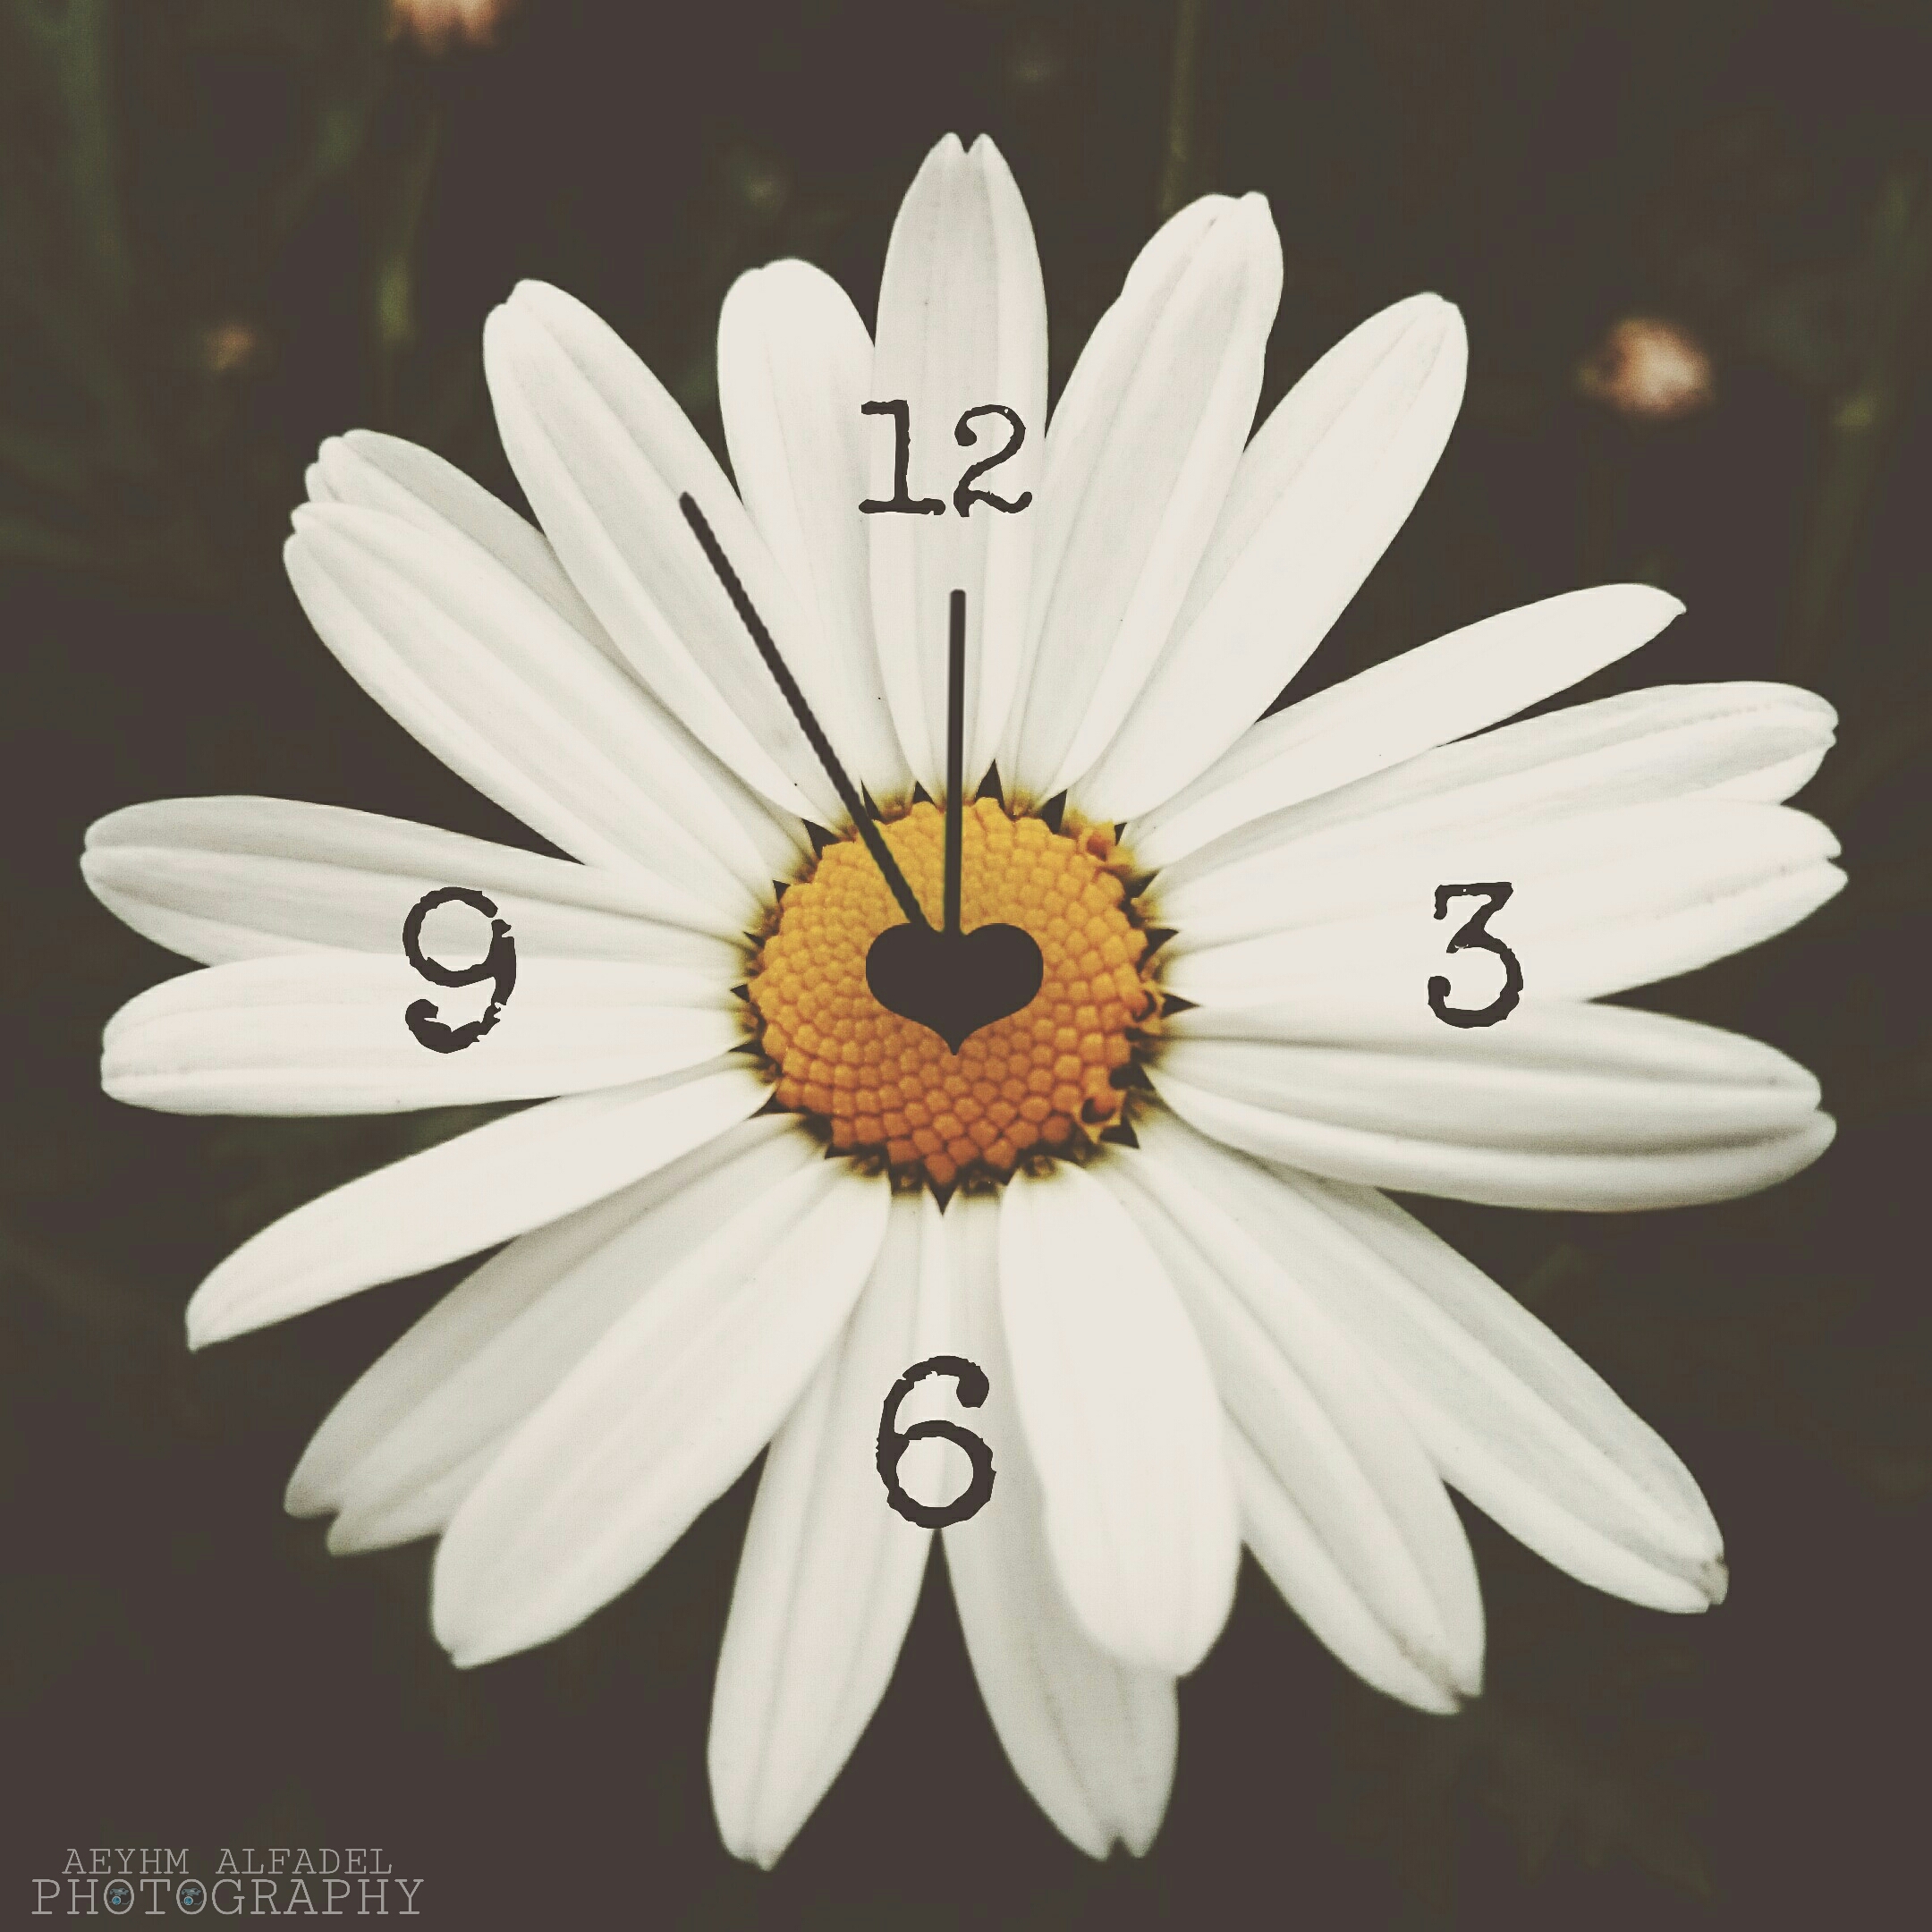 What is the time in your country? (my snap and my edit) #clock #love #emotions #nature #flower #polygonside #vintage #edited 